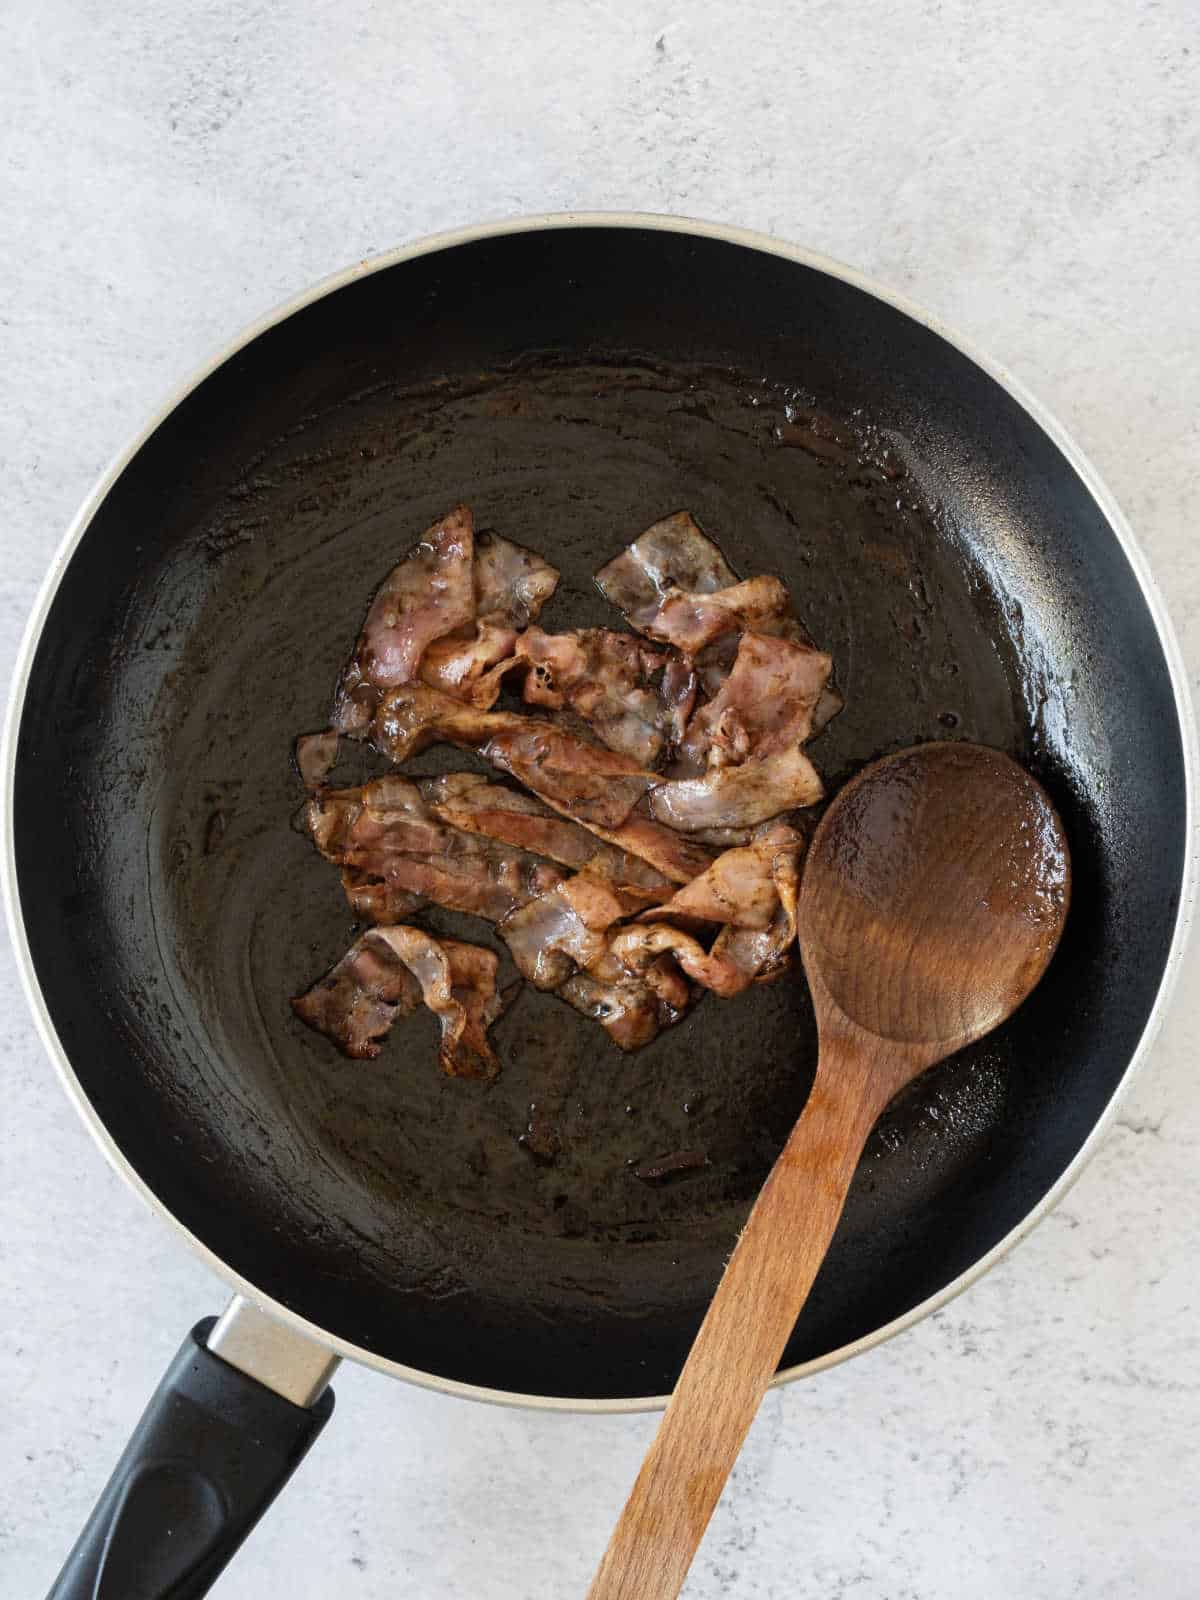 Cooked bacon strips with balsamic in a black skillet with a wooden spoon. Grey surface.